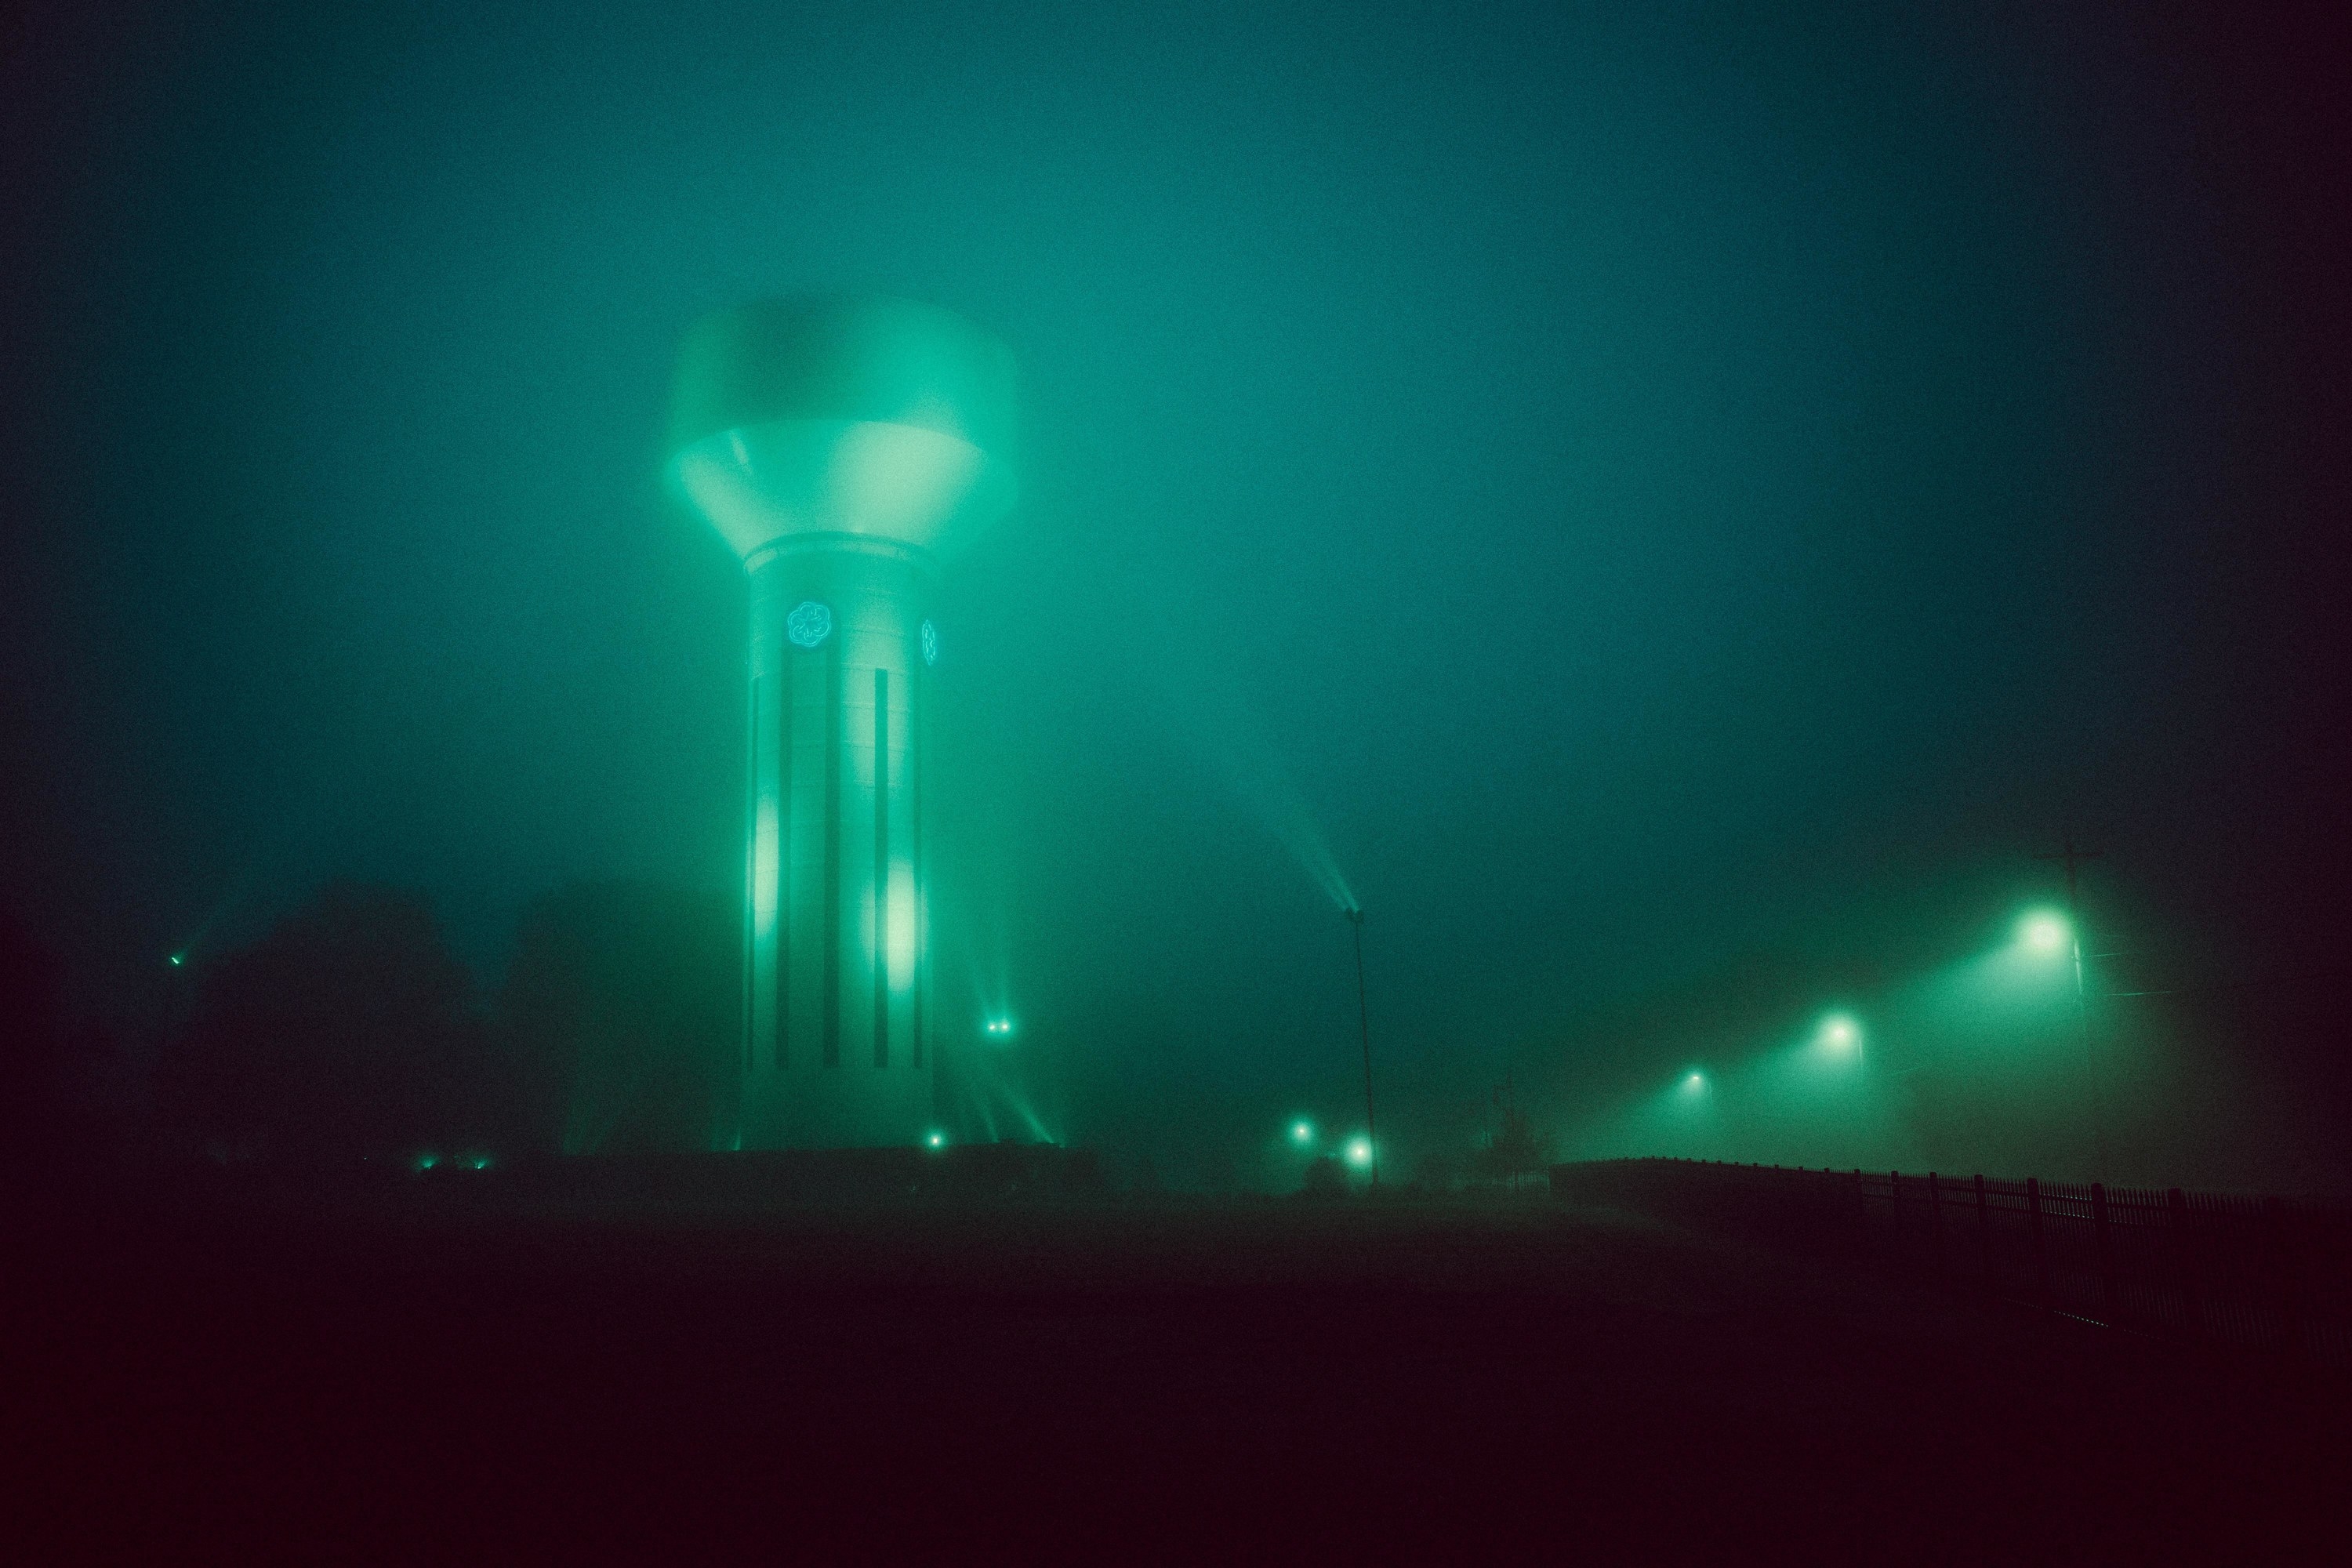 A water tower at night in the fog with eerie, alien-like lighting